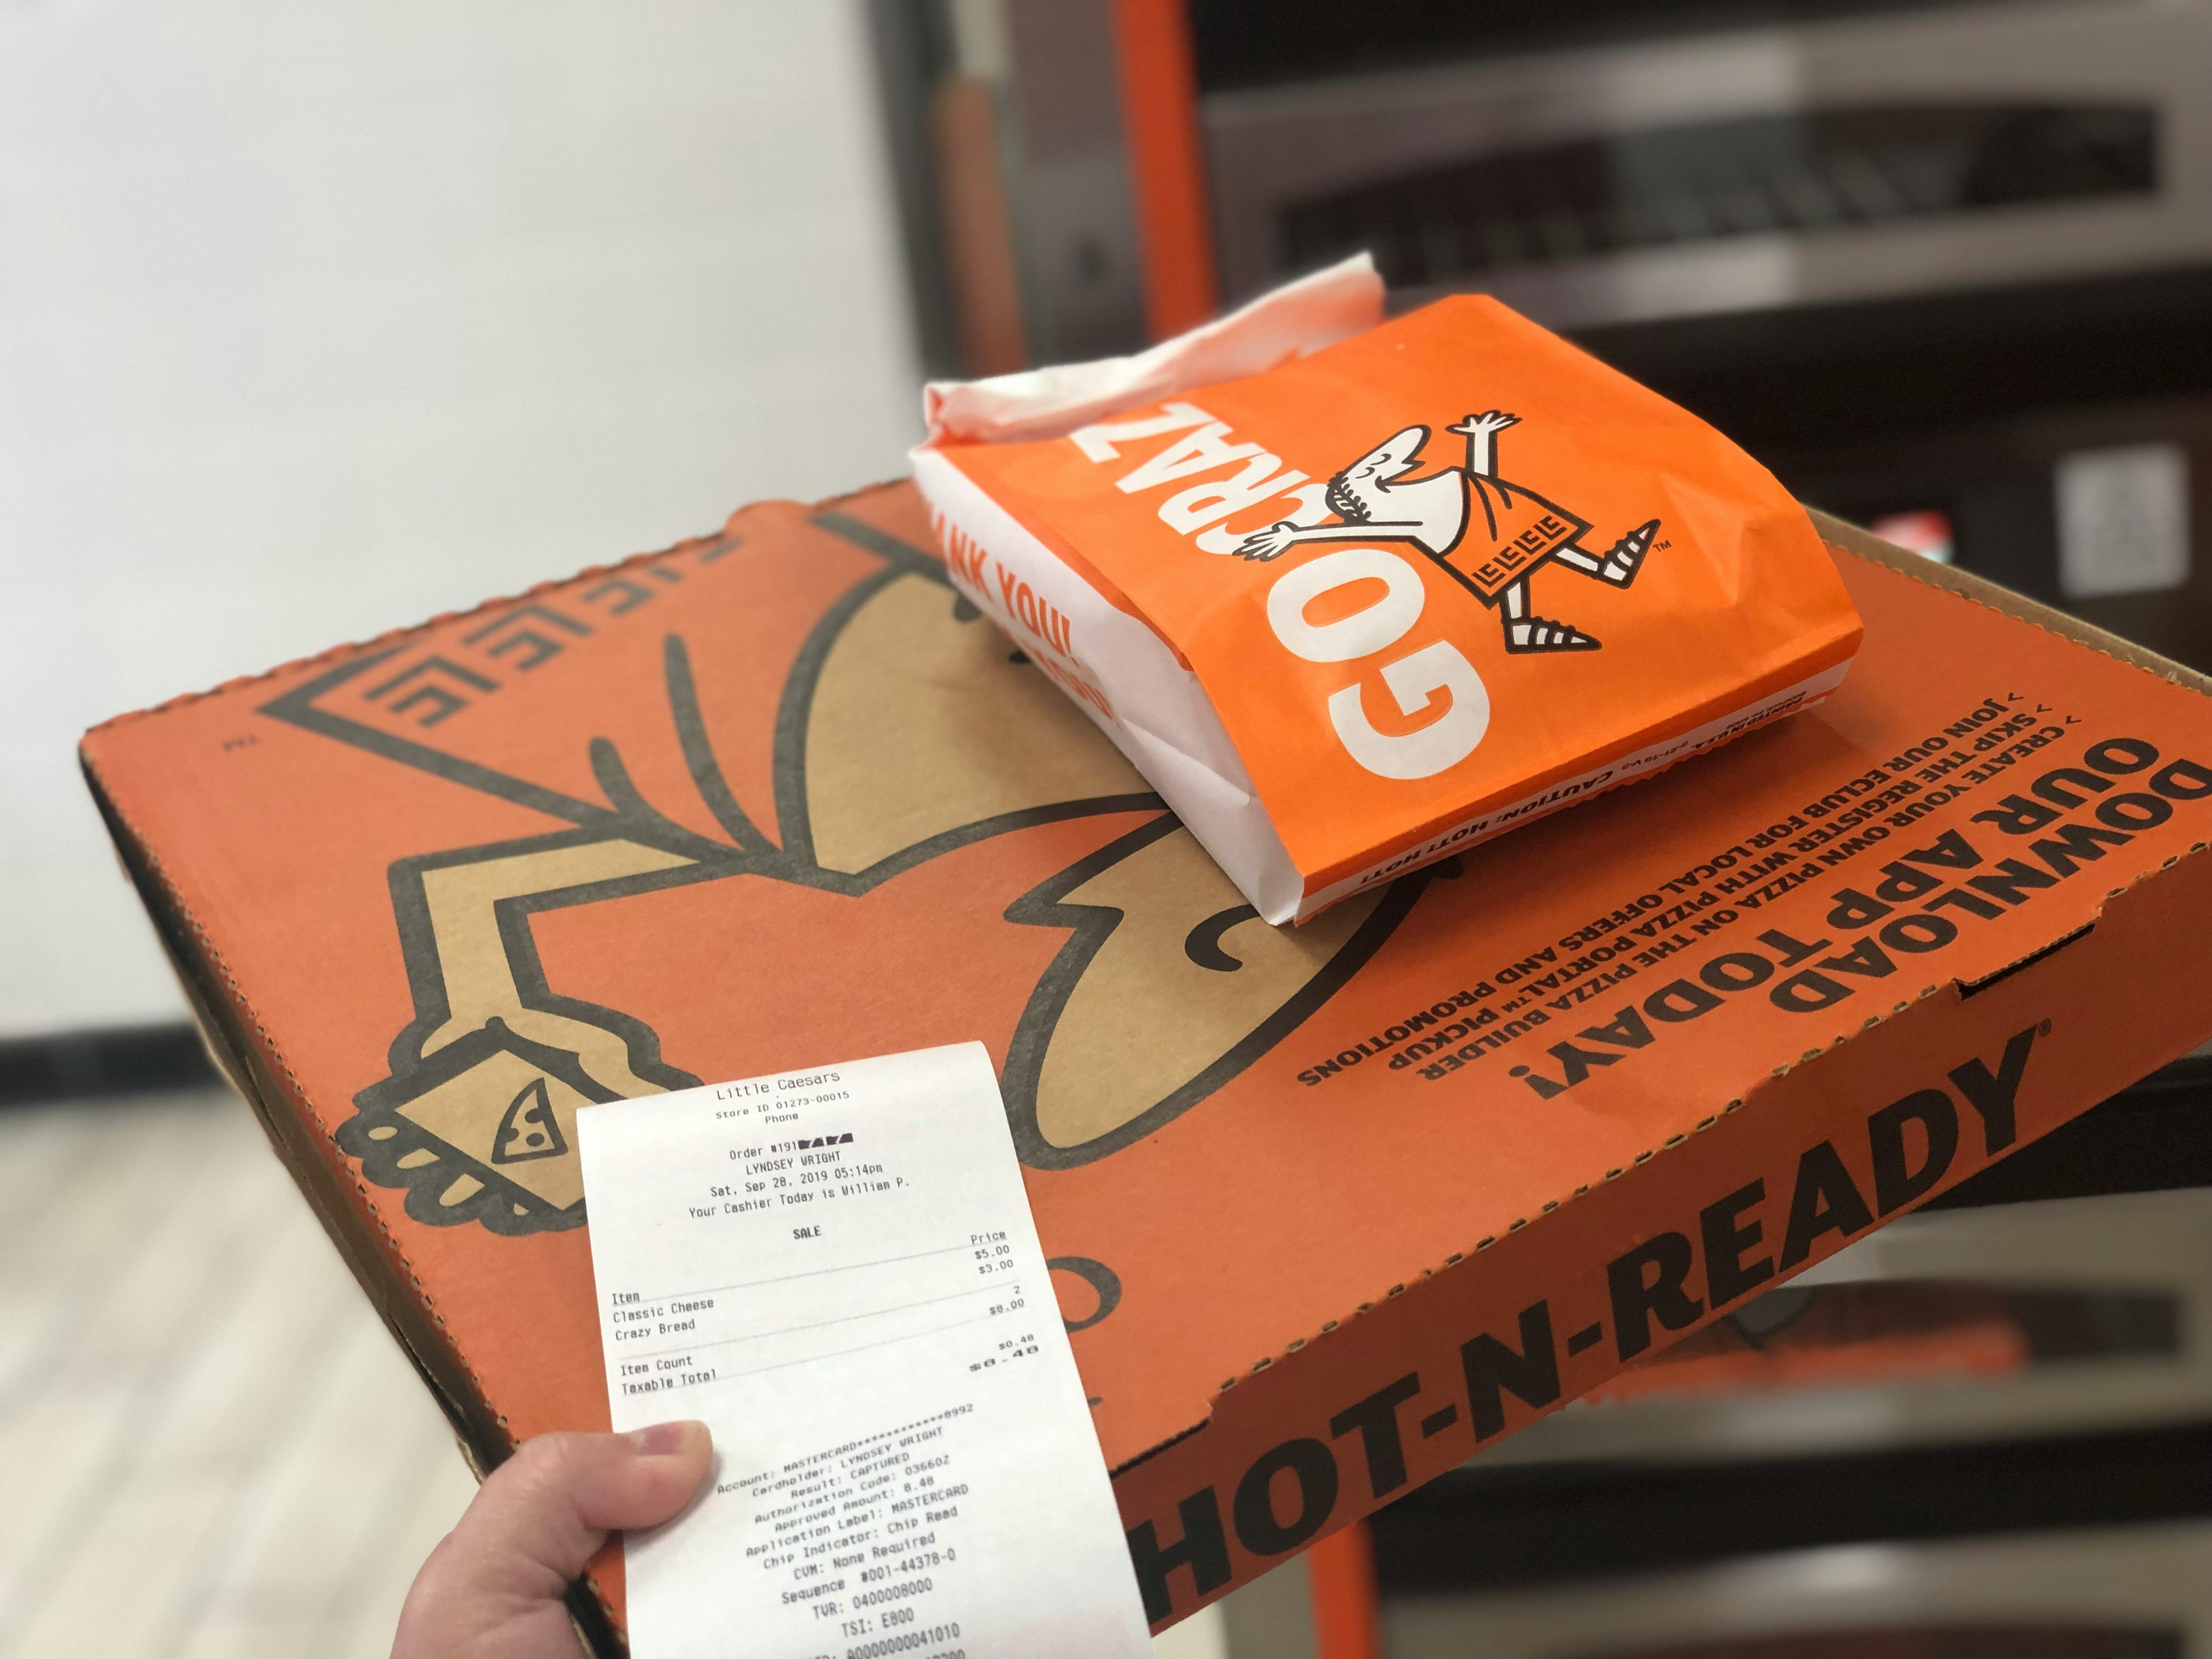 17-genius-tips-to-get-little-caesars-deals-and-coupons-the-krazy